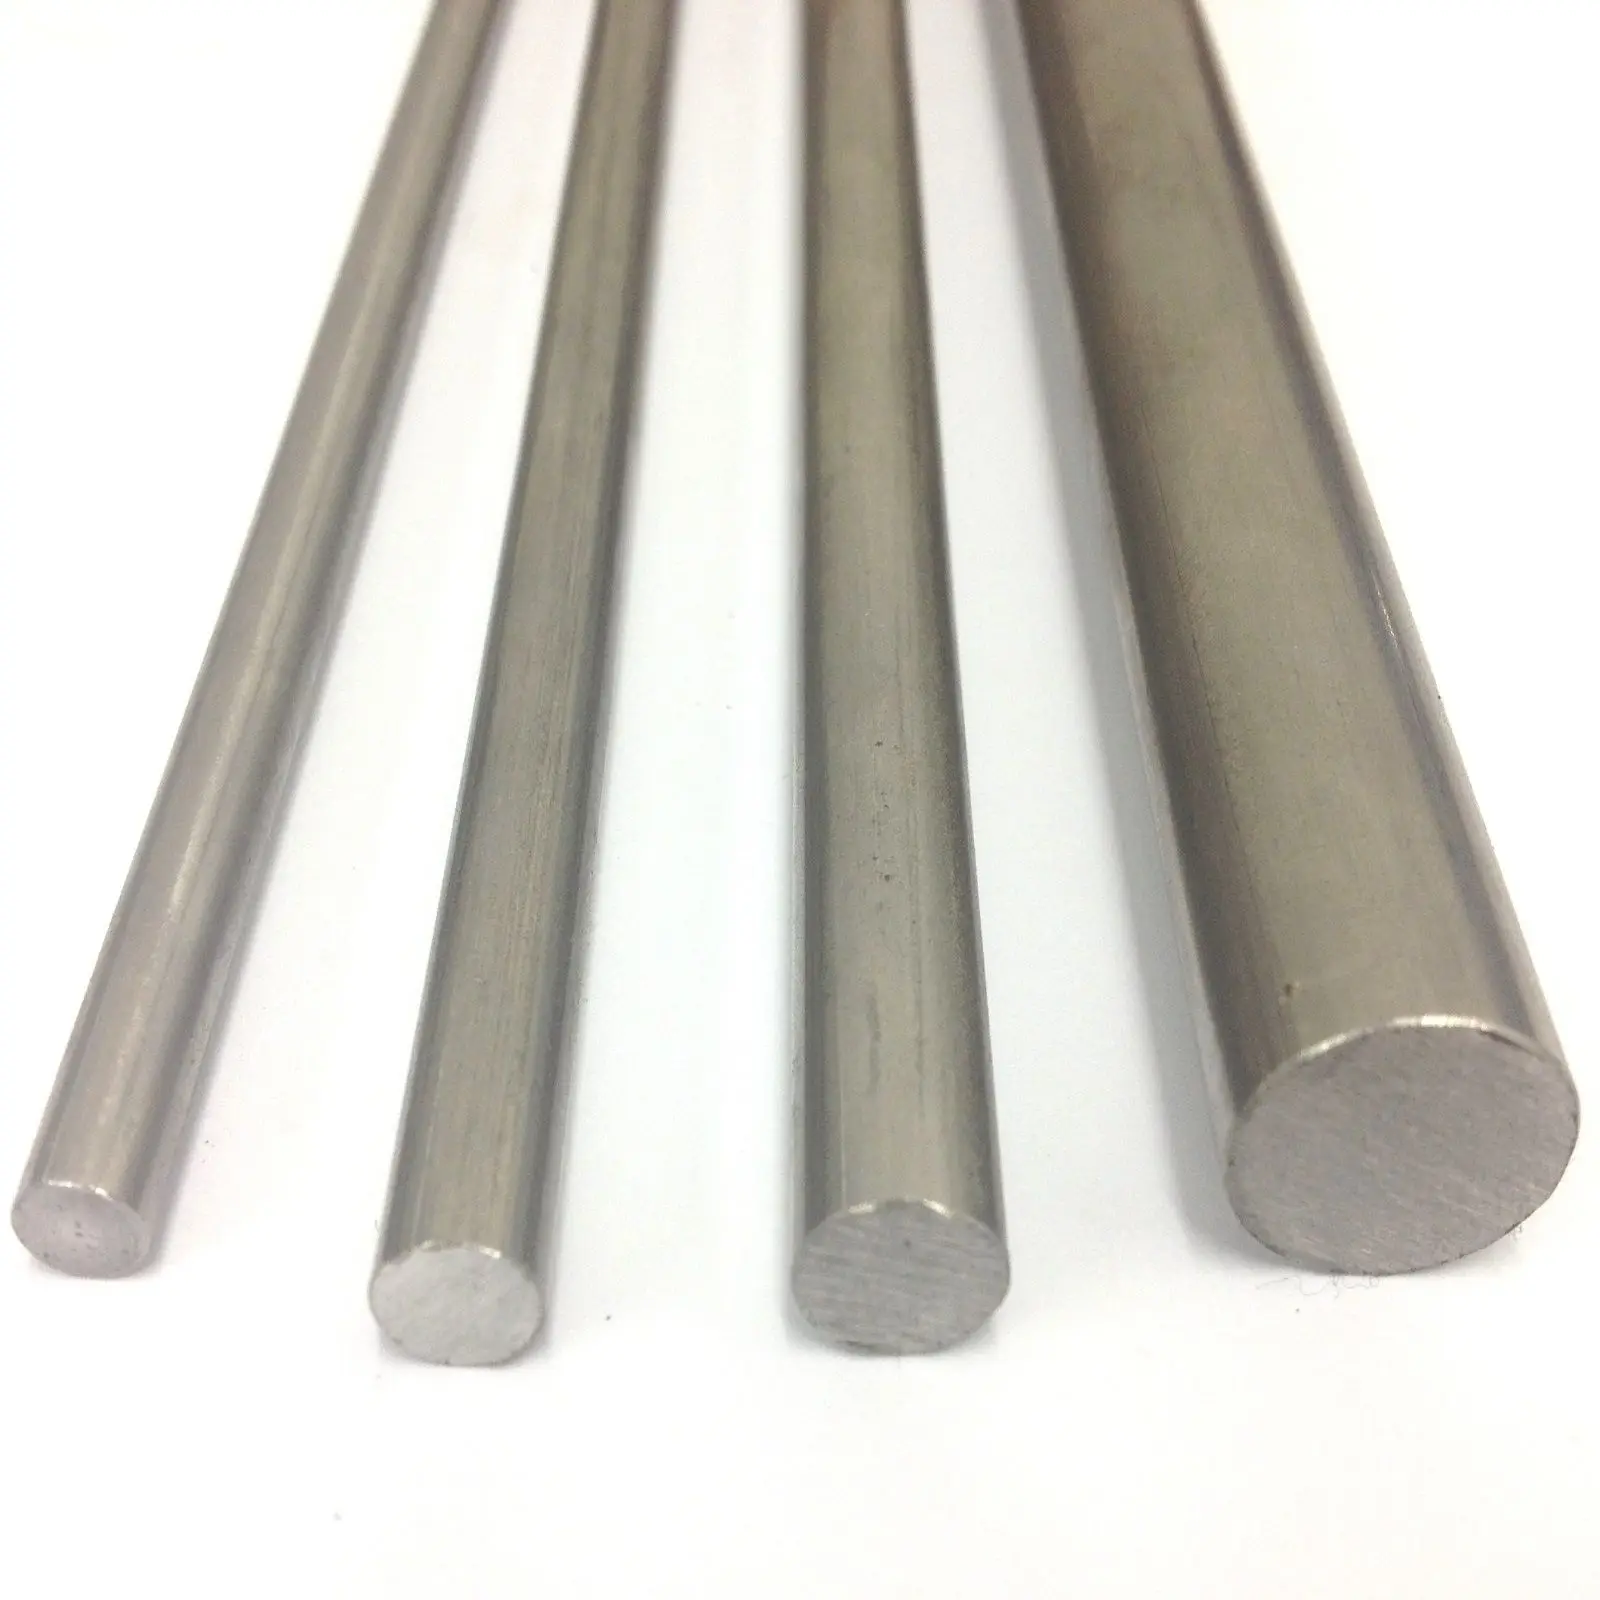 100mm to 1000mm Long CHEAP Stainless Steel 303 Round Solid Bar 1/4" to 2" Dia 